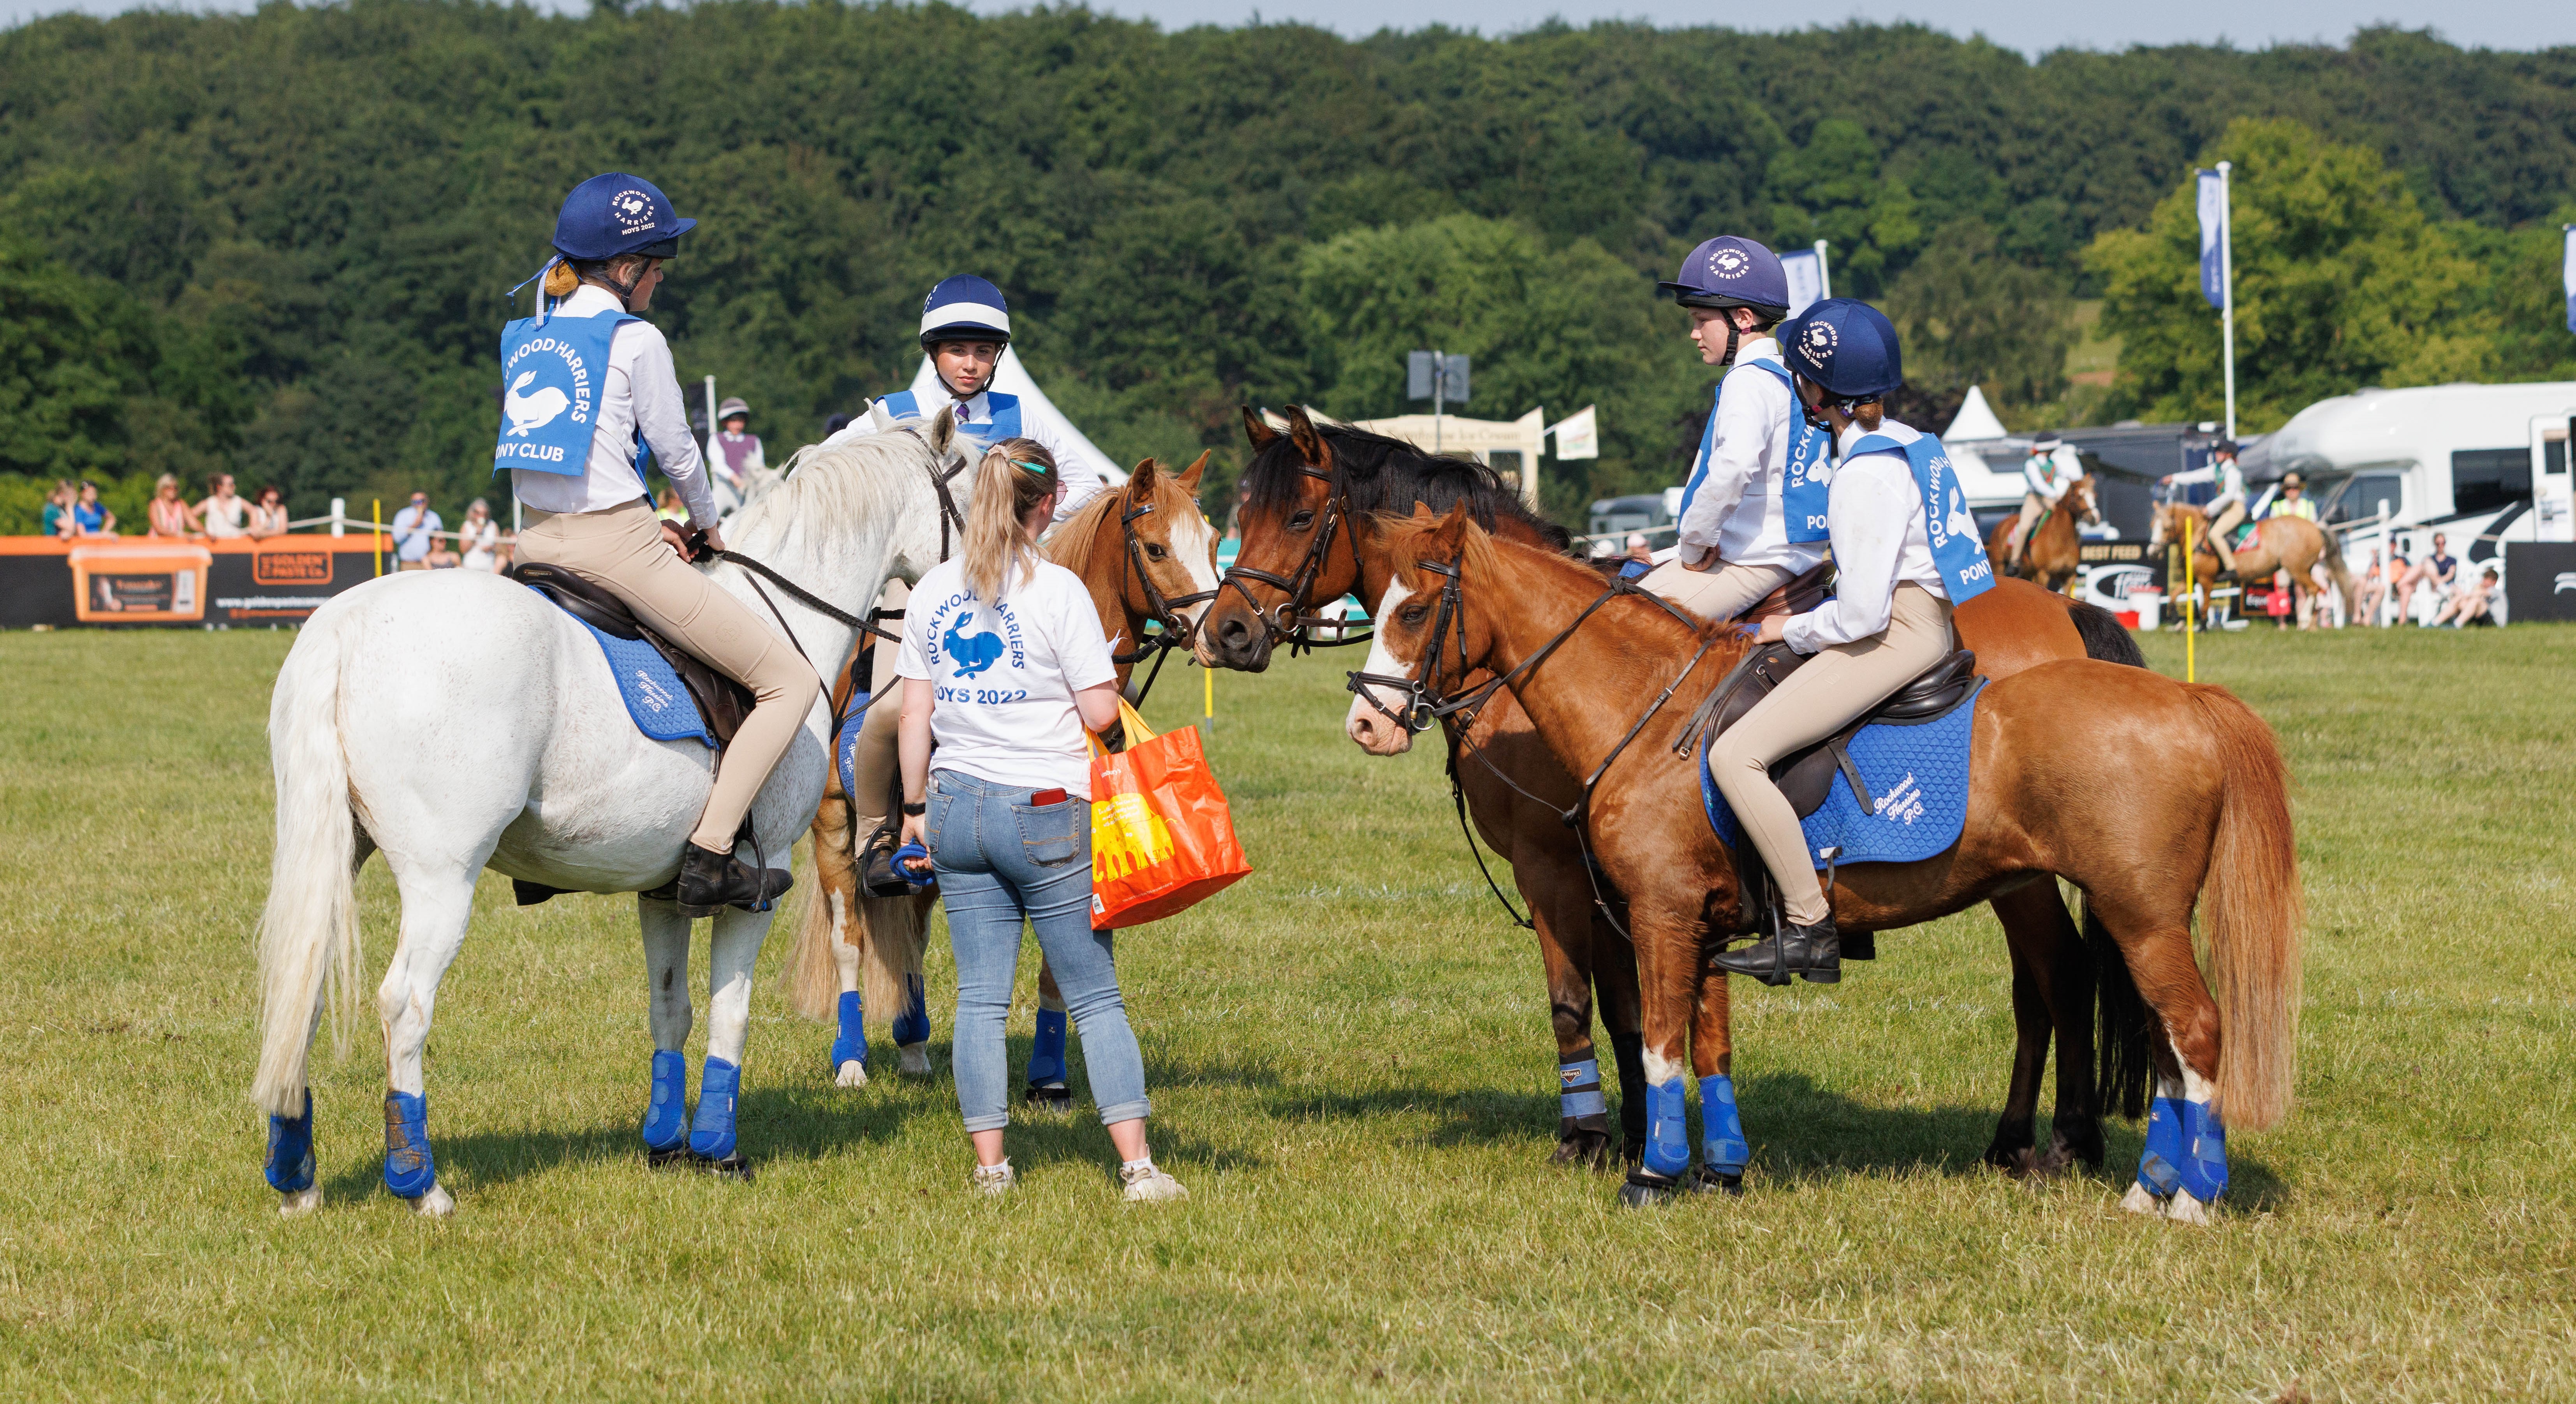 British Equestrian seeks research partner to determine social value of equestrian sector